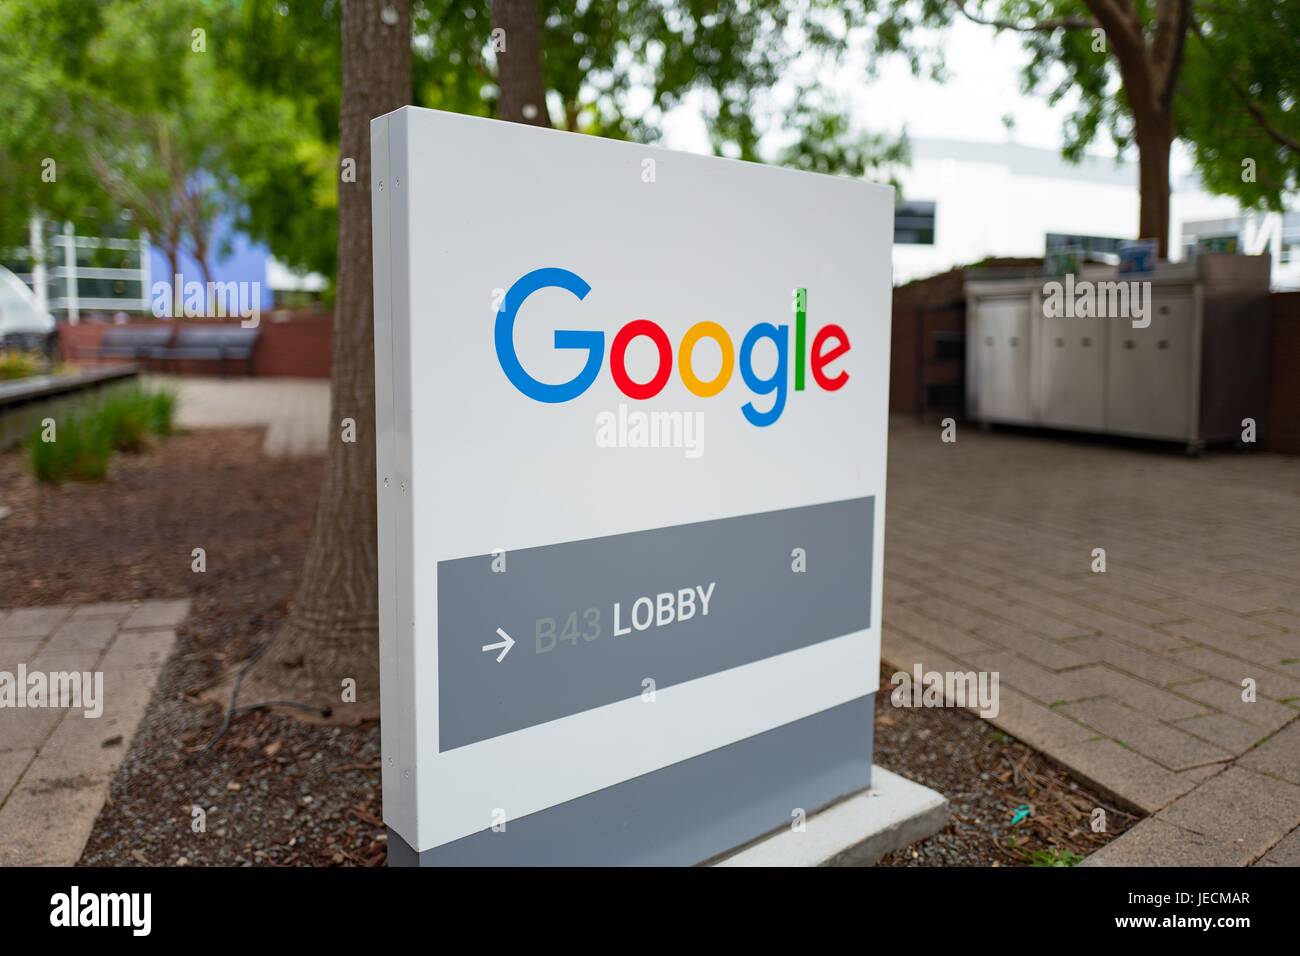 Google signage with logo at the Googleplex, headquarters of Google Inc in the Silicon Valley town of Mountain View, California, April 7, 2017. Stock Photo